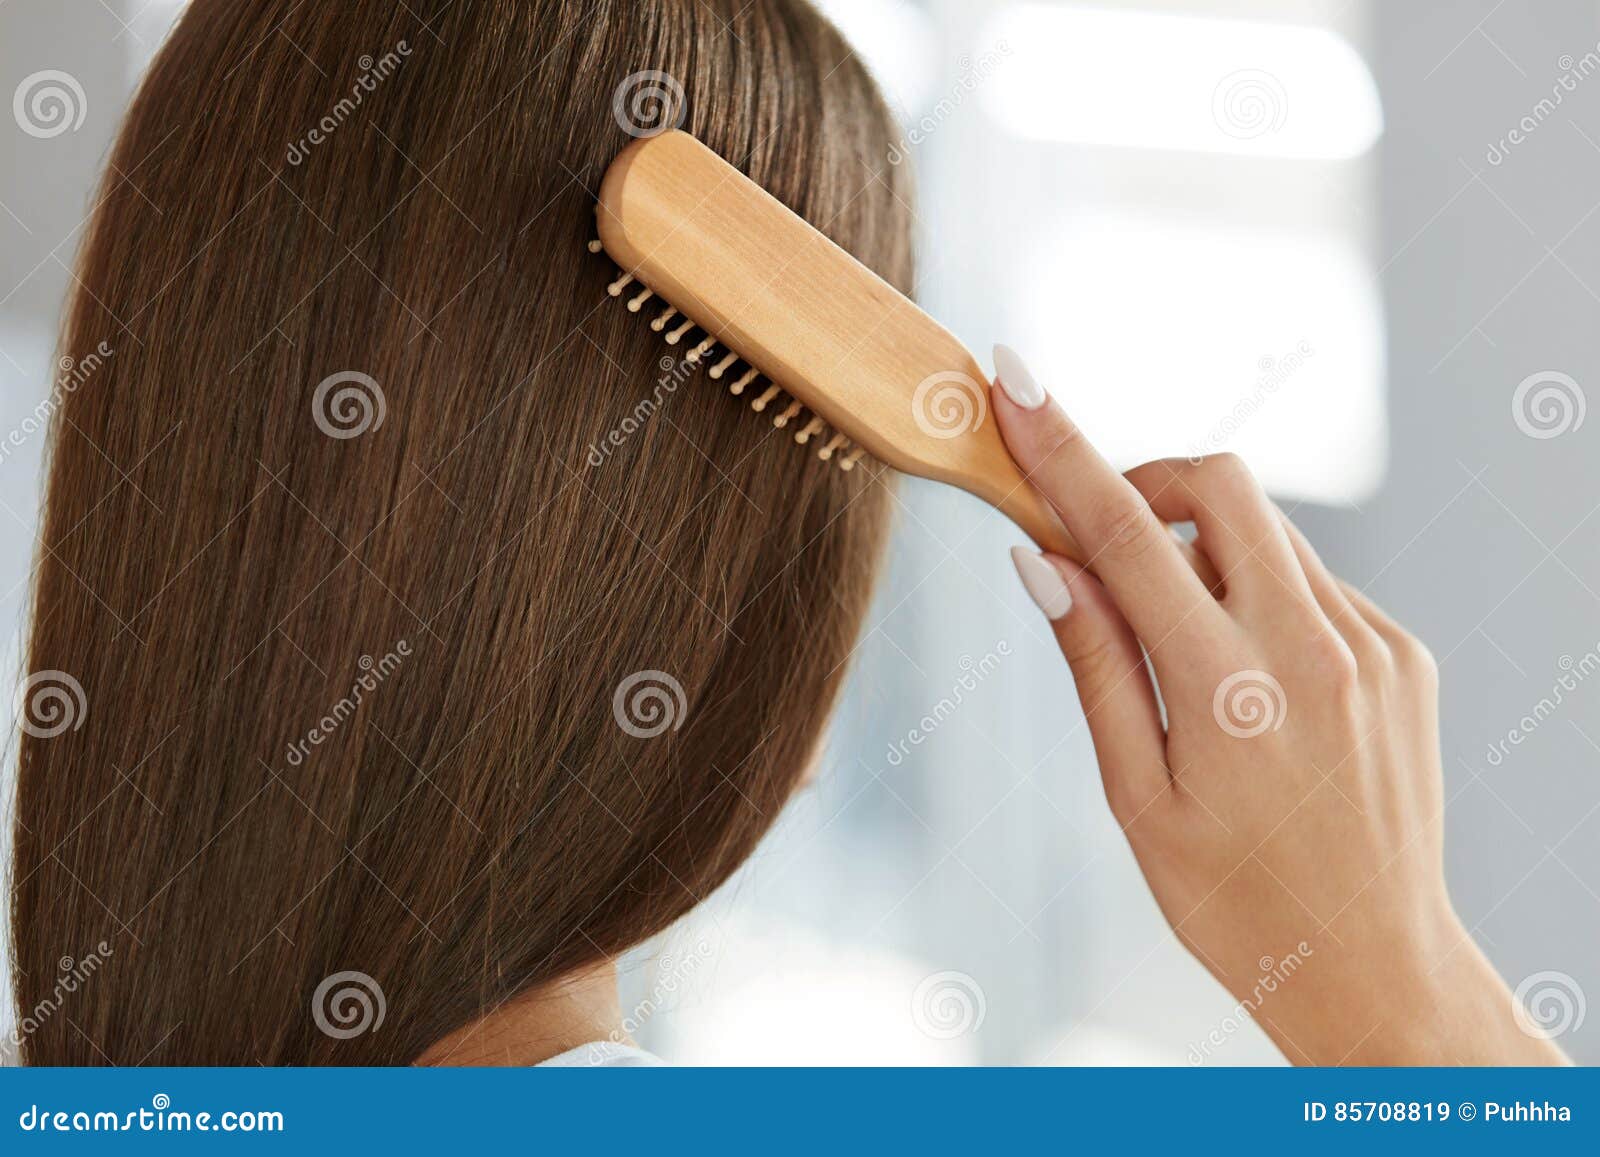 back view of woman with healthy long hair brushing it with brush